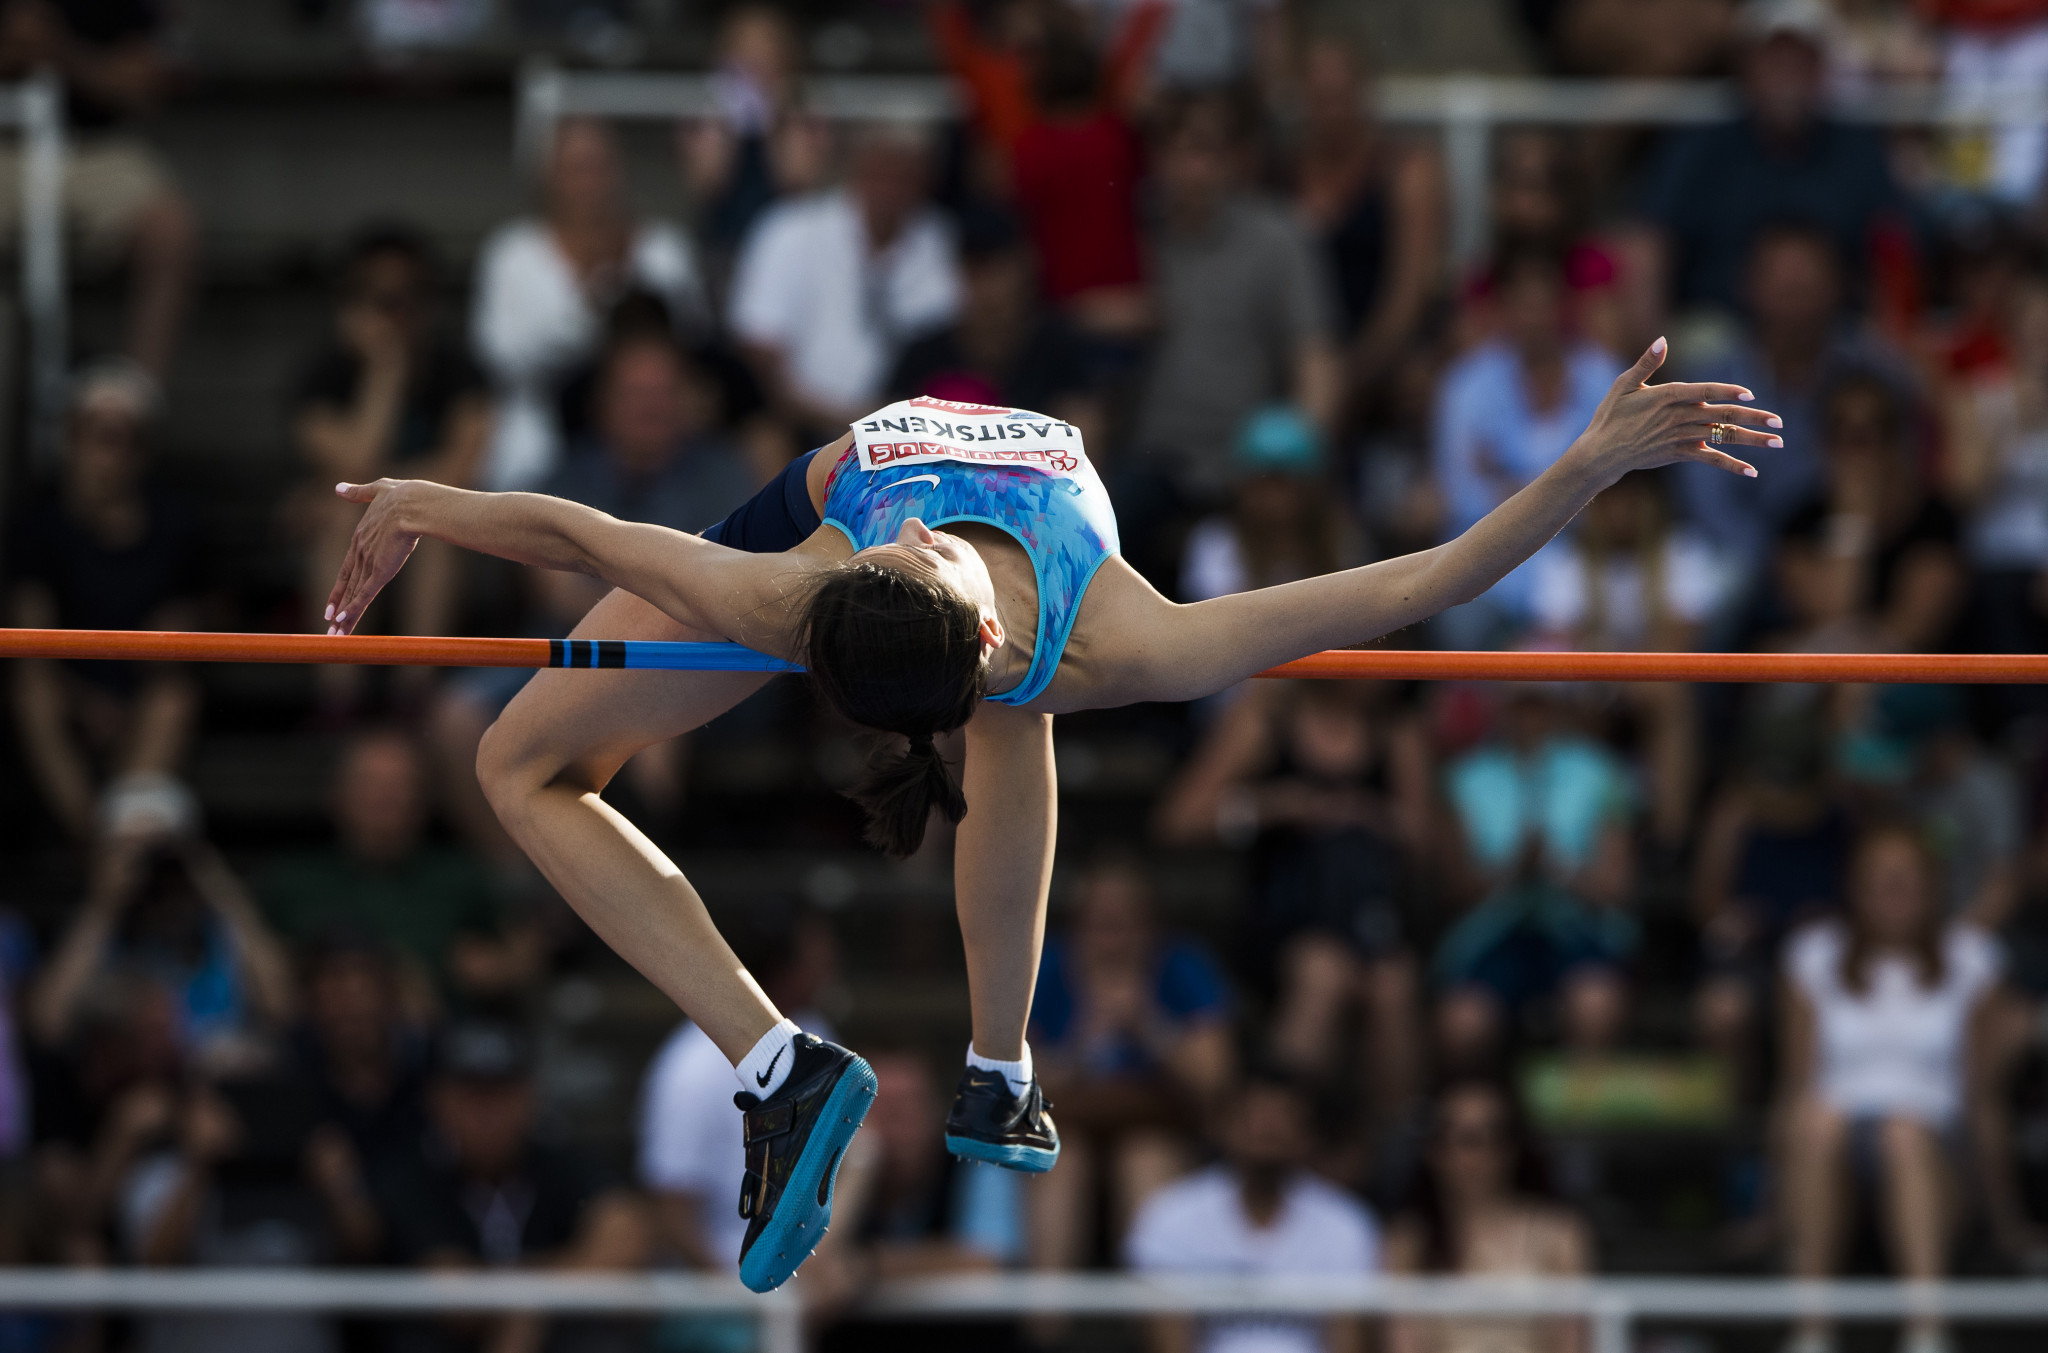 Mariya Lasitskene will be chasing another high jump title in Torun ©Getty Images